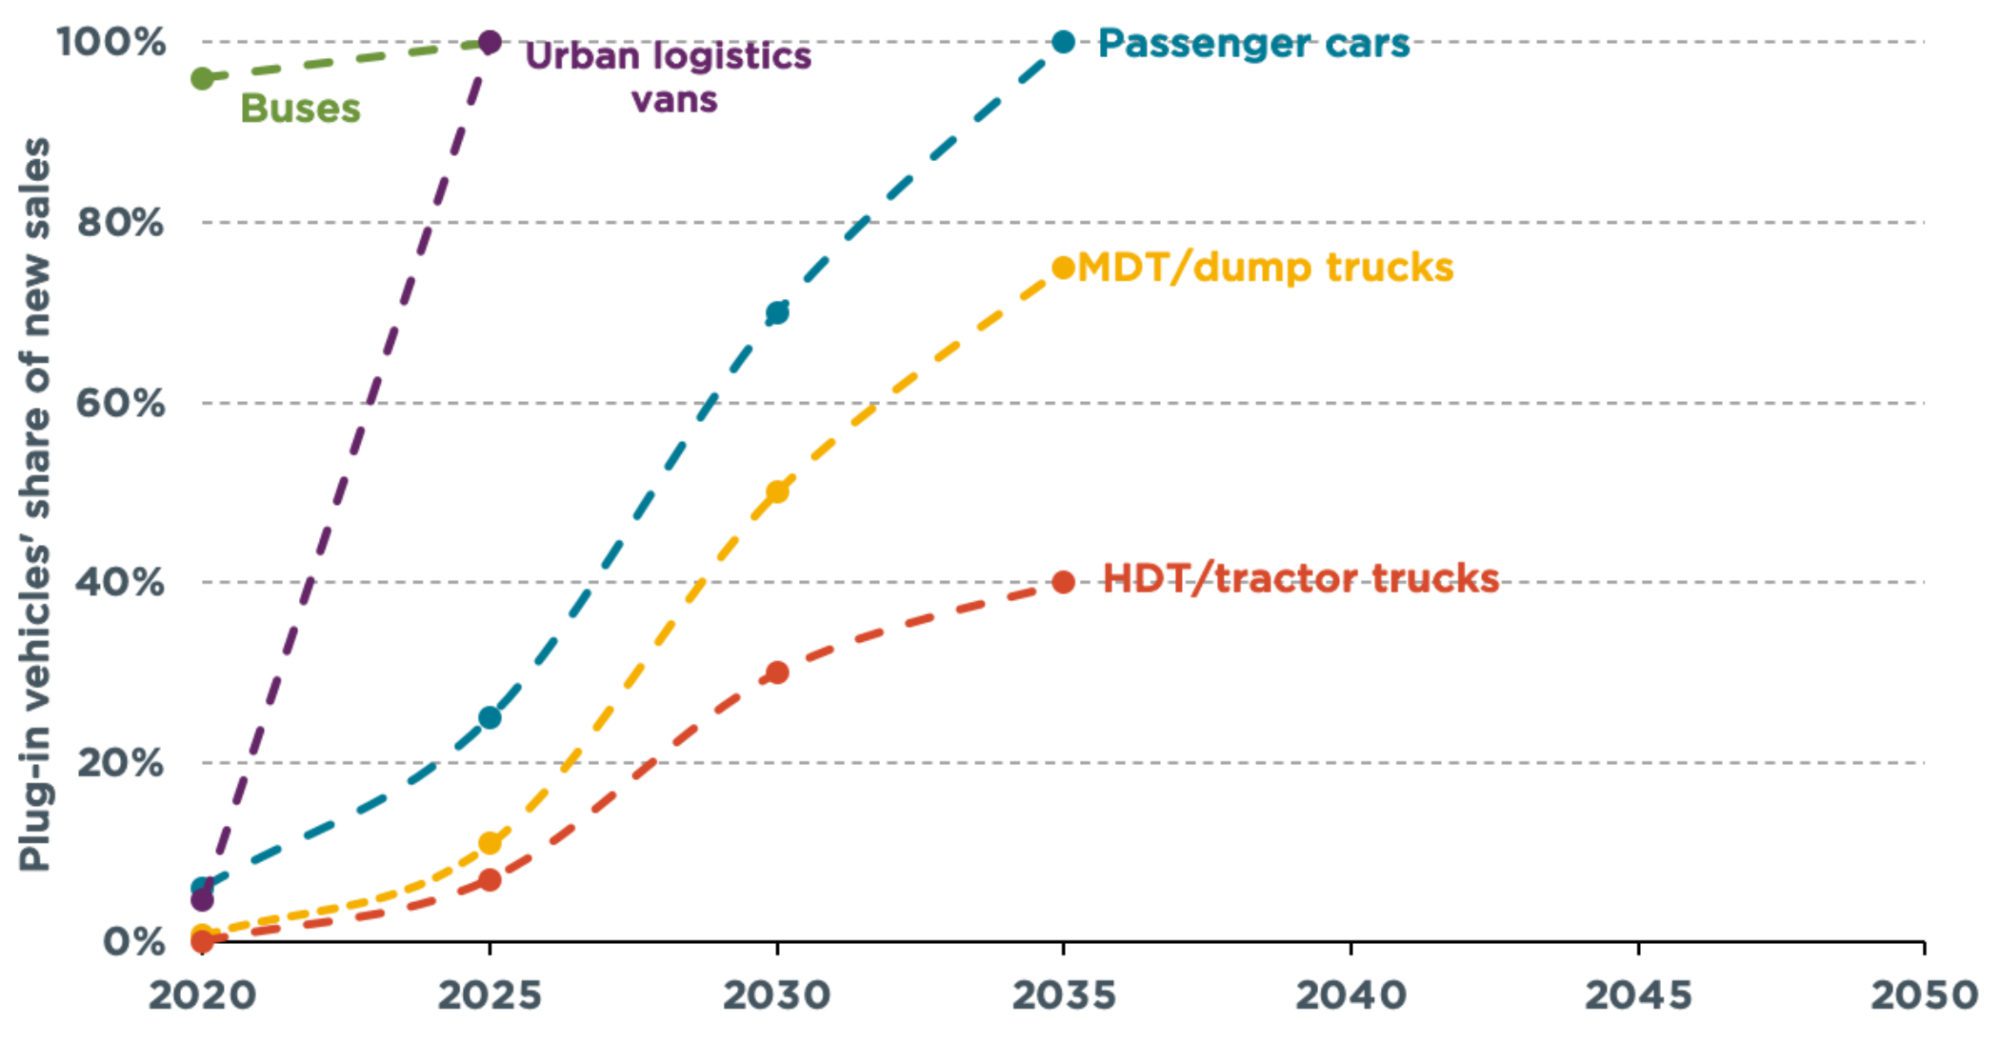 Line graph showing recommended targets over time for different vehicle segments in Cihna